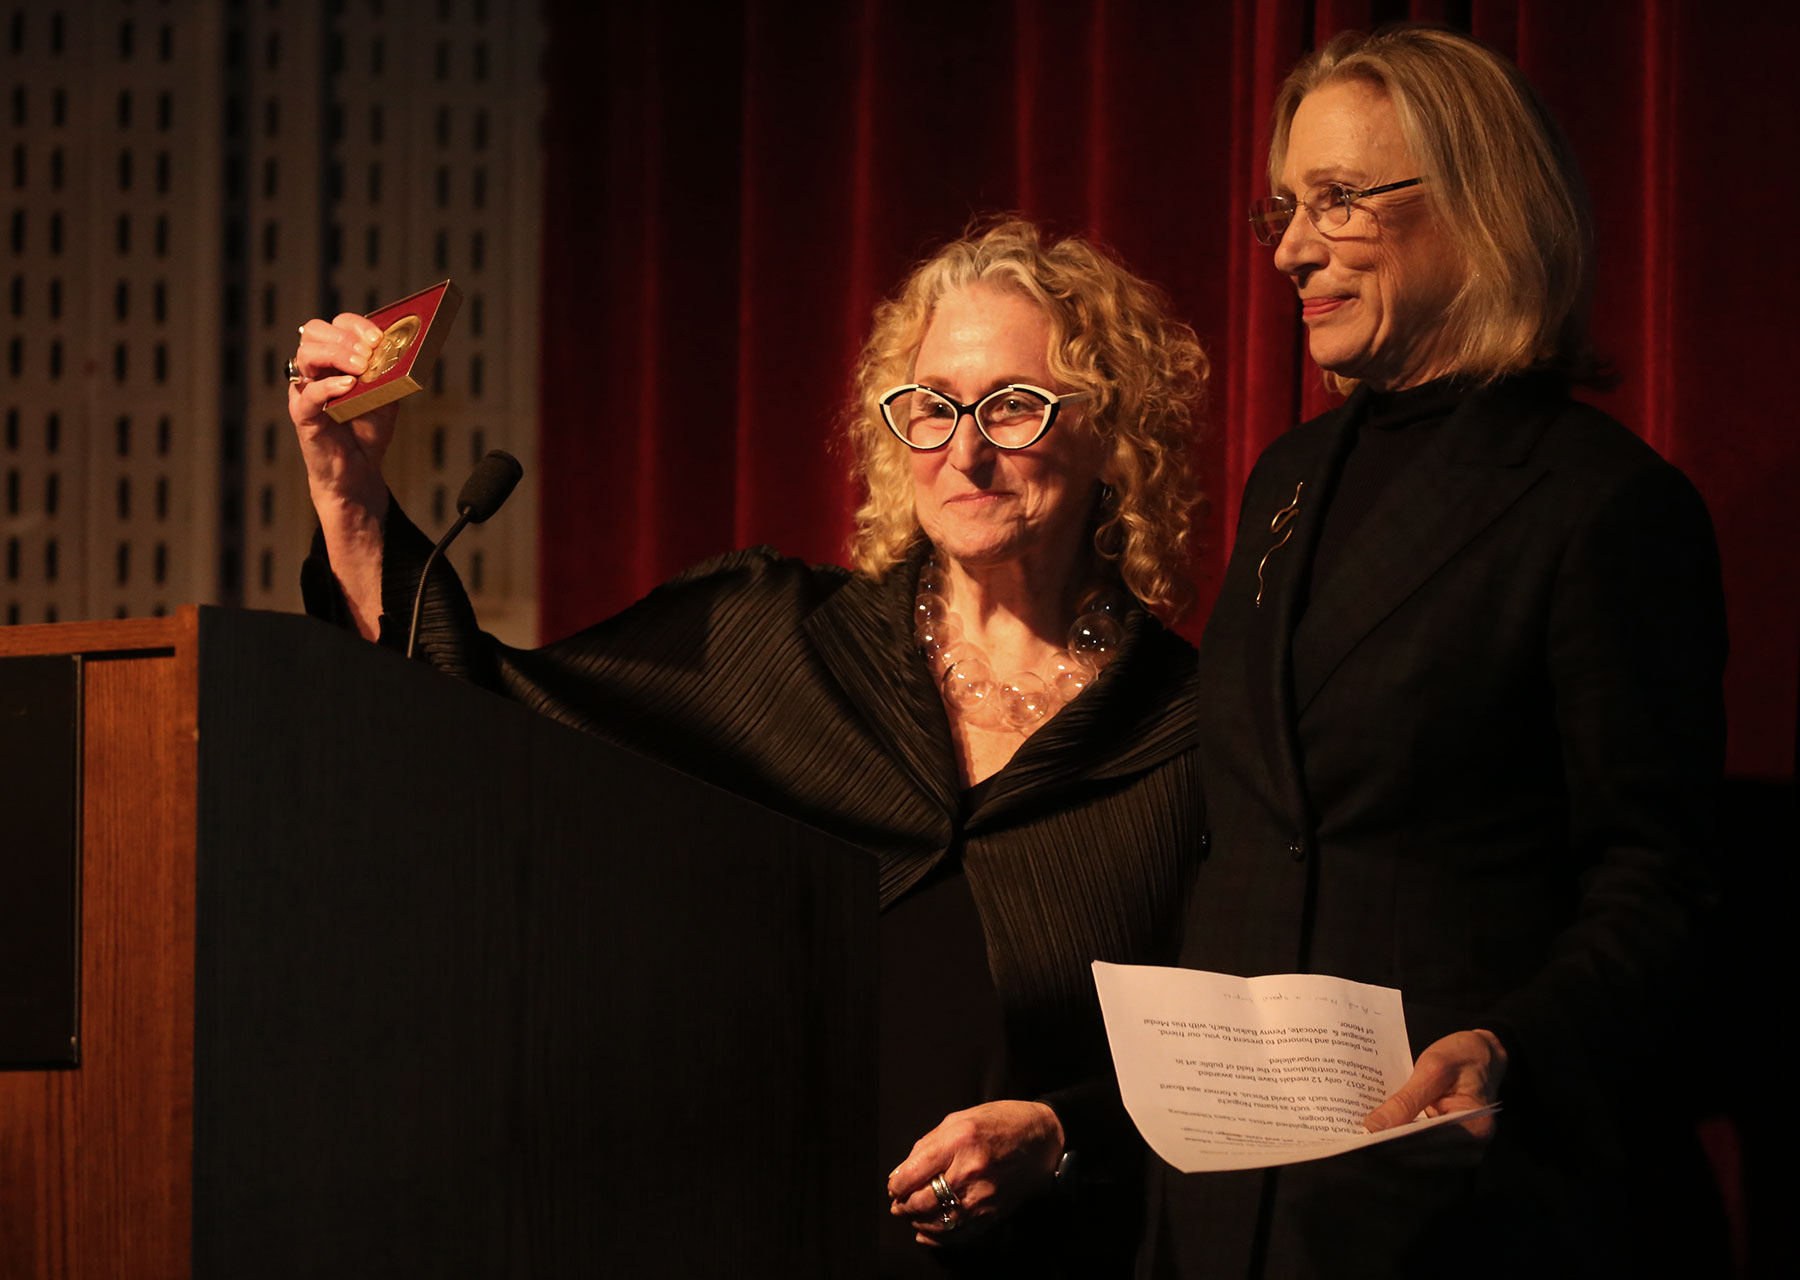 Penny Balkin Bach, longtime aPA Executive Director, holds up the medal of honor she has just received. She is standing next to Board President Barbara Aronson. Both women, smiling, have blonde hair are wearing black clothes, and behind them are red stage curtains. It is the Association for Public Art's Annual Meeting event at Moore College of Art and Design in Philadelphia, PA.